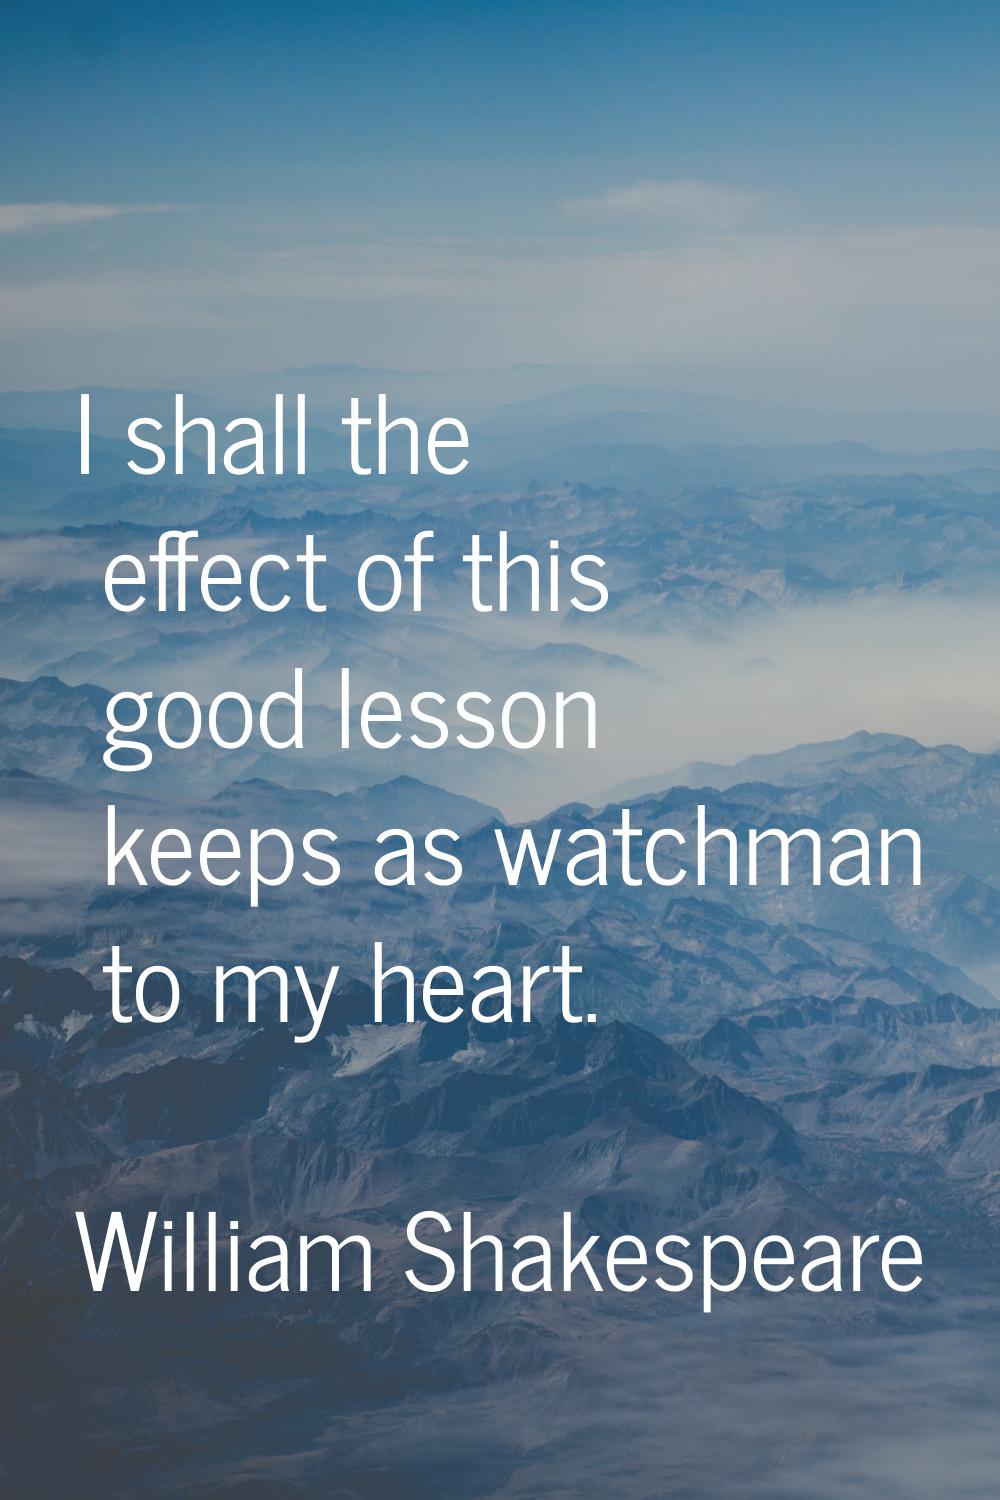 I shall the effect of this good lesson keeps as watchman to my heart.